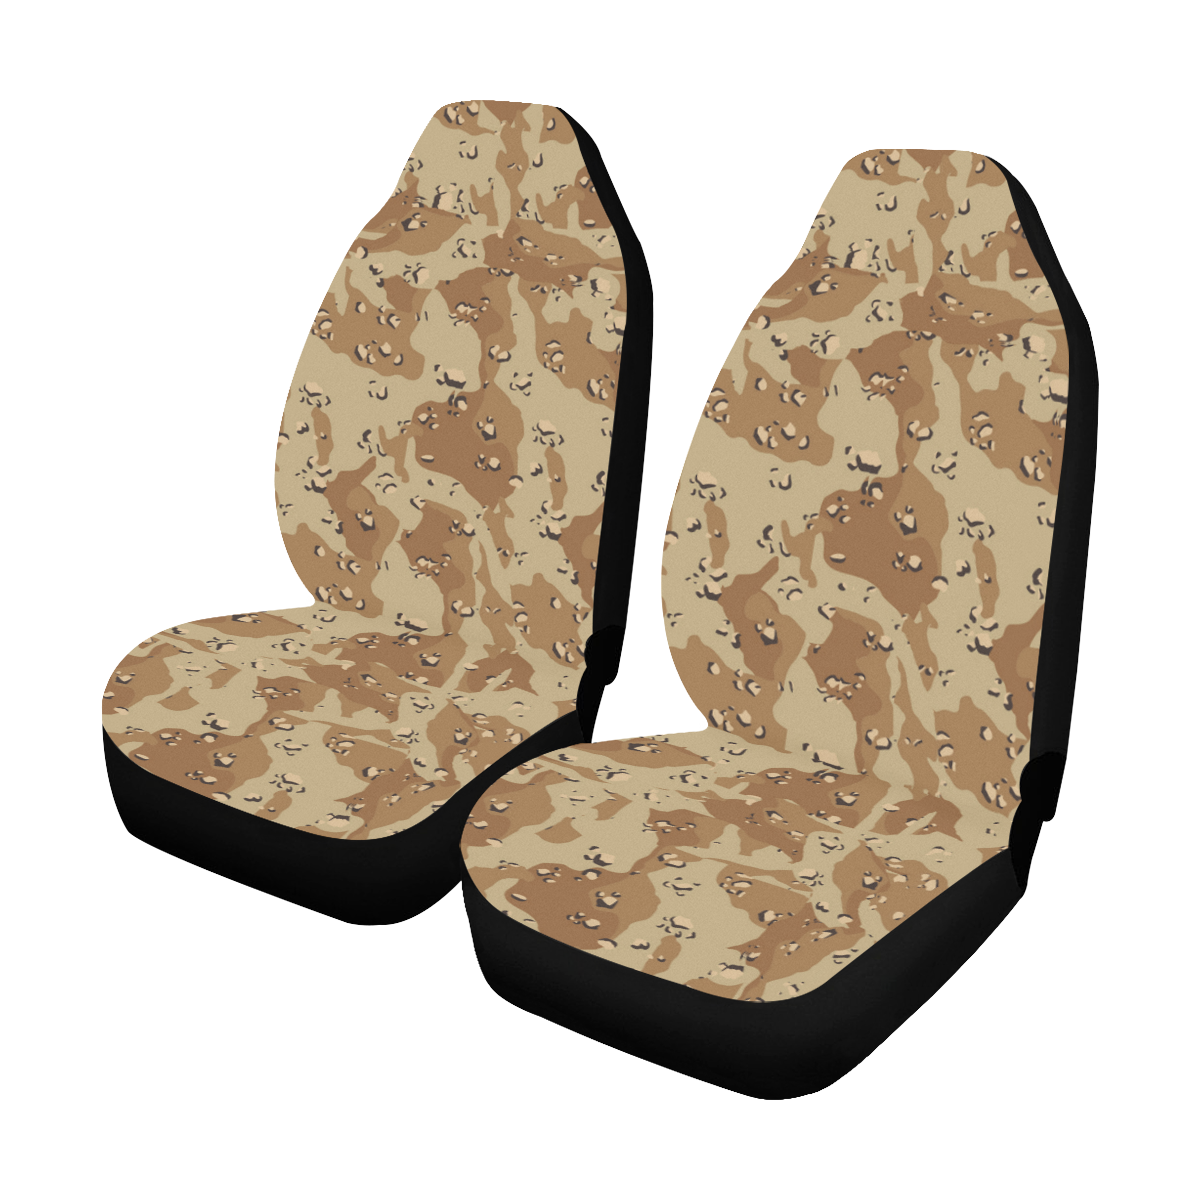 Desert Camouflage Pattern Car Seat Covers (Set of 2)